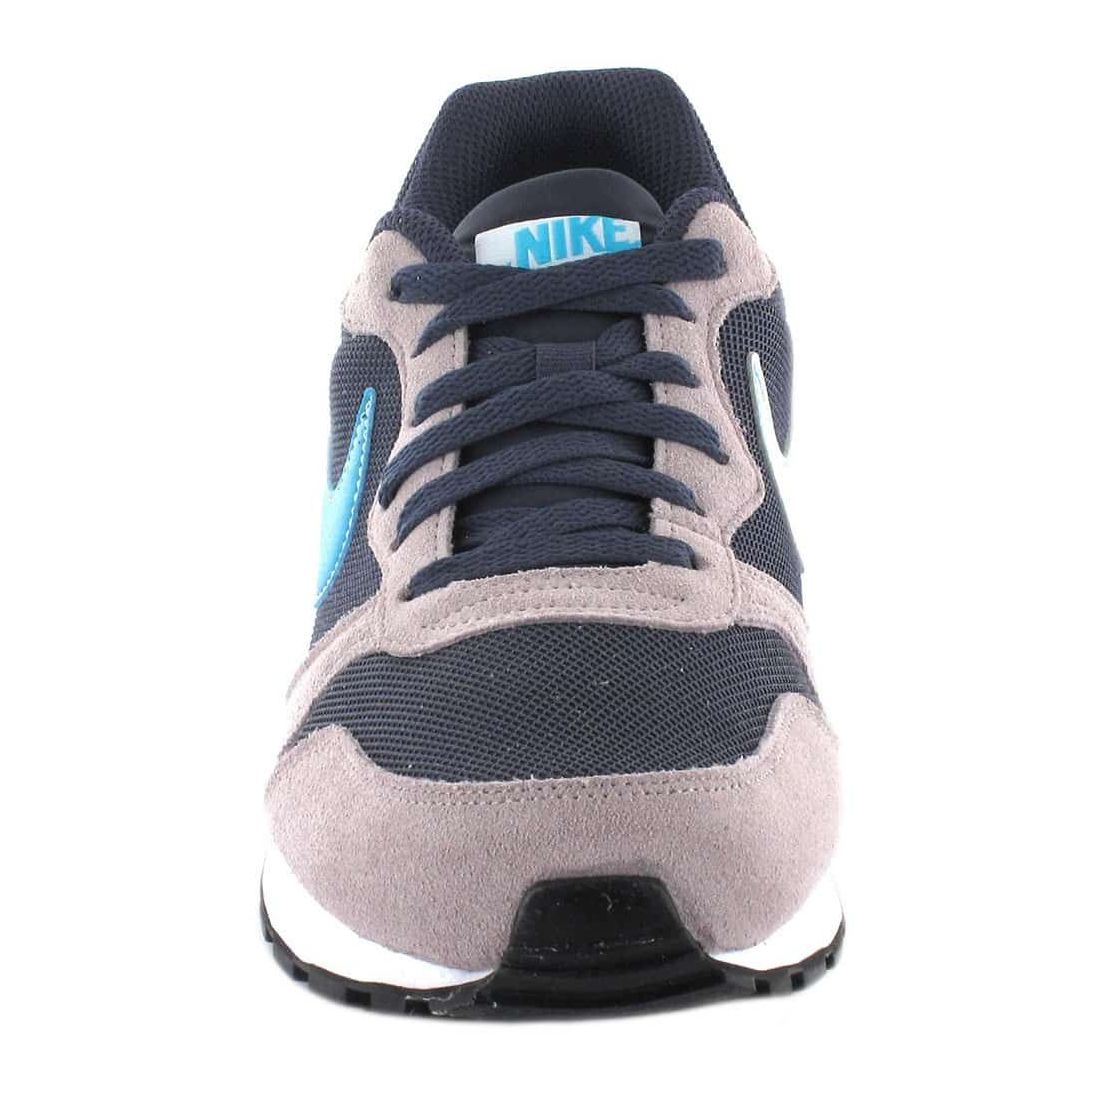 Nike MD Runner 2 002 Sizes 42 Color Gris